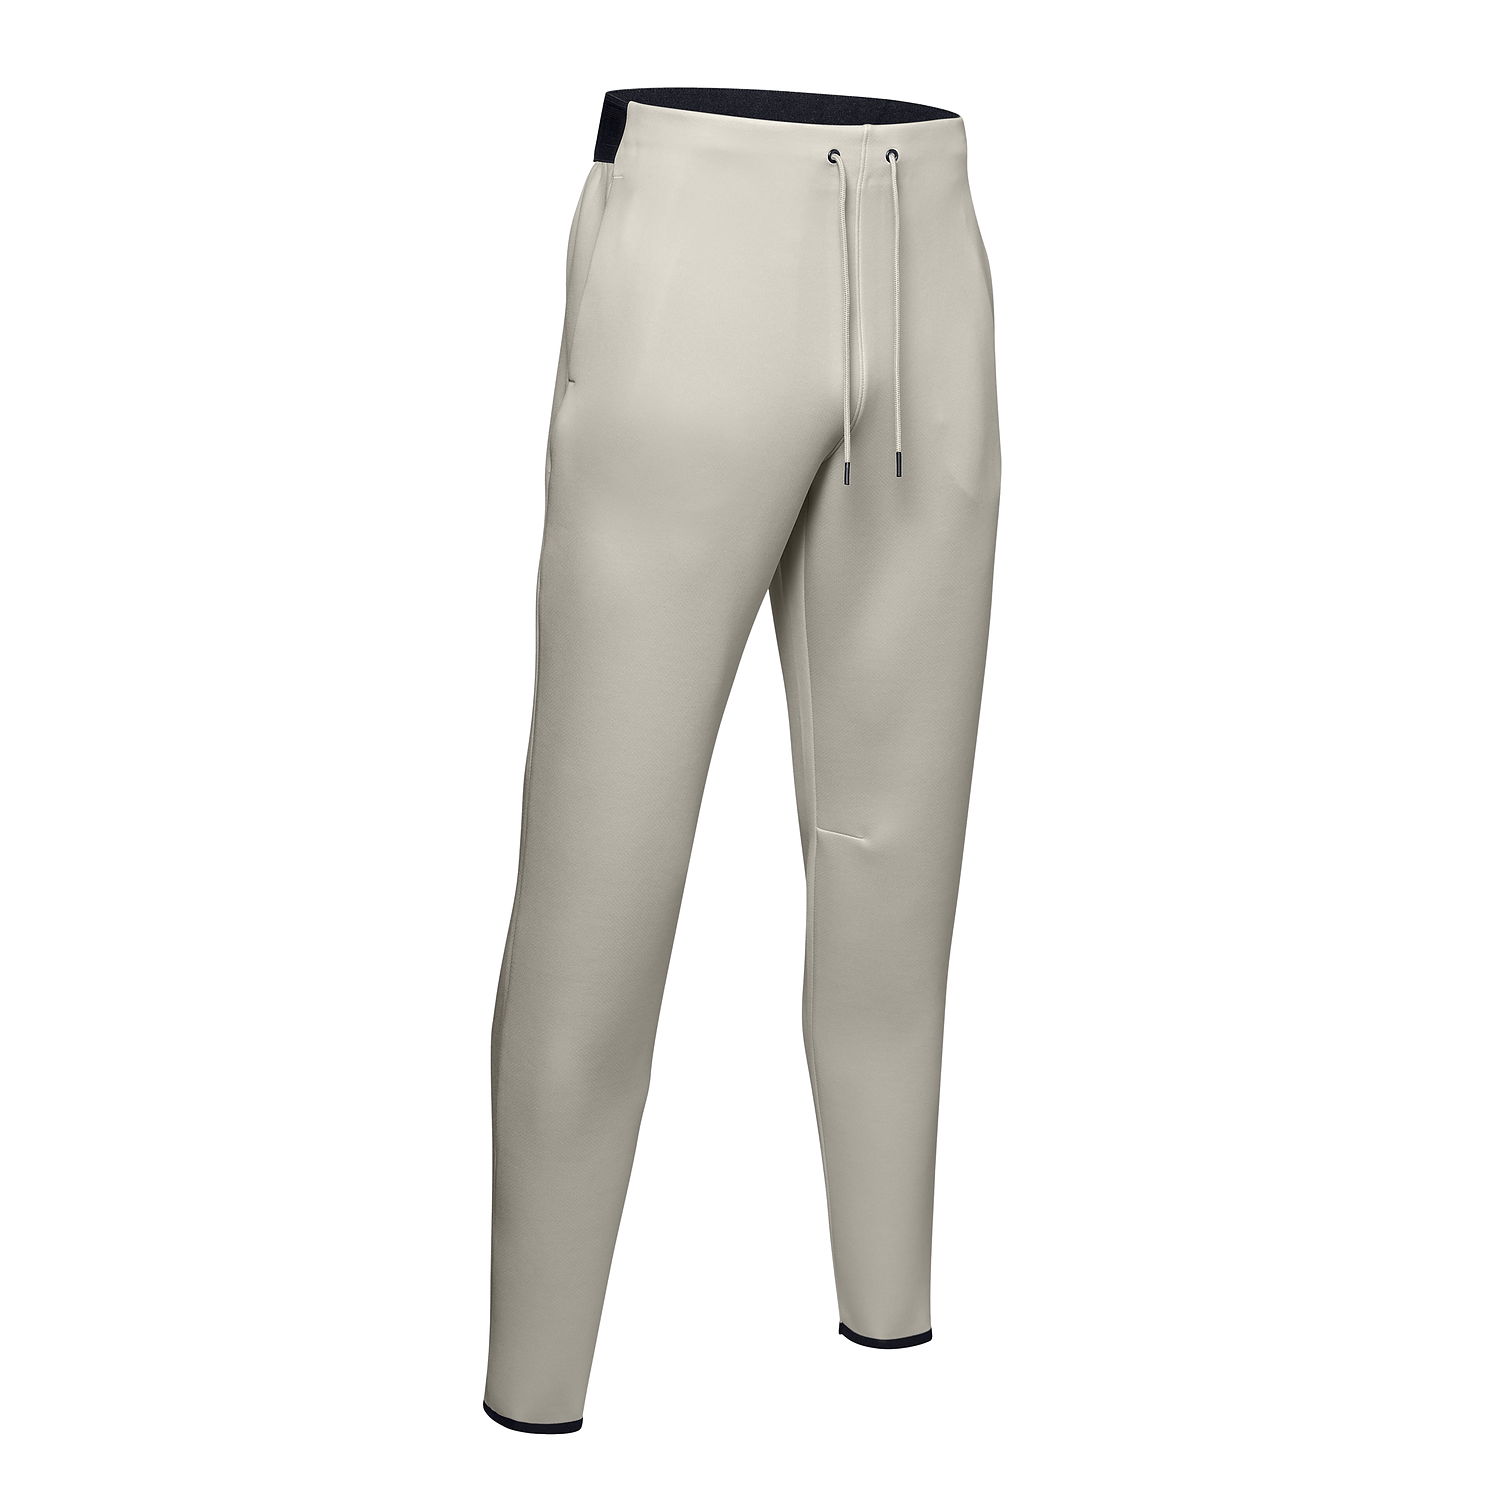 Under Armour 'MOVE' Mens Flat Front Pants (Medium, Summit White) - image 1 of 2